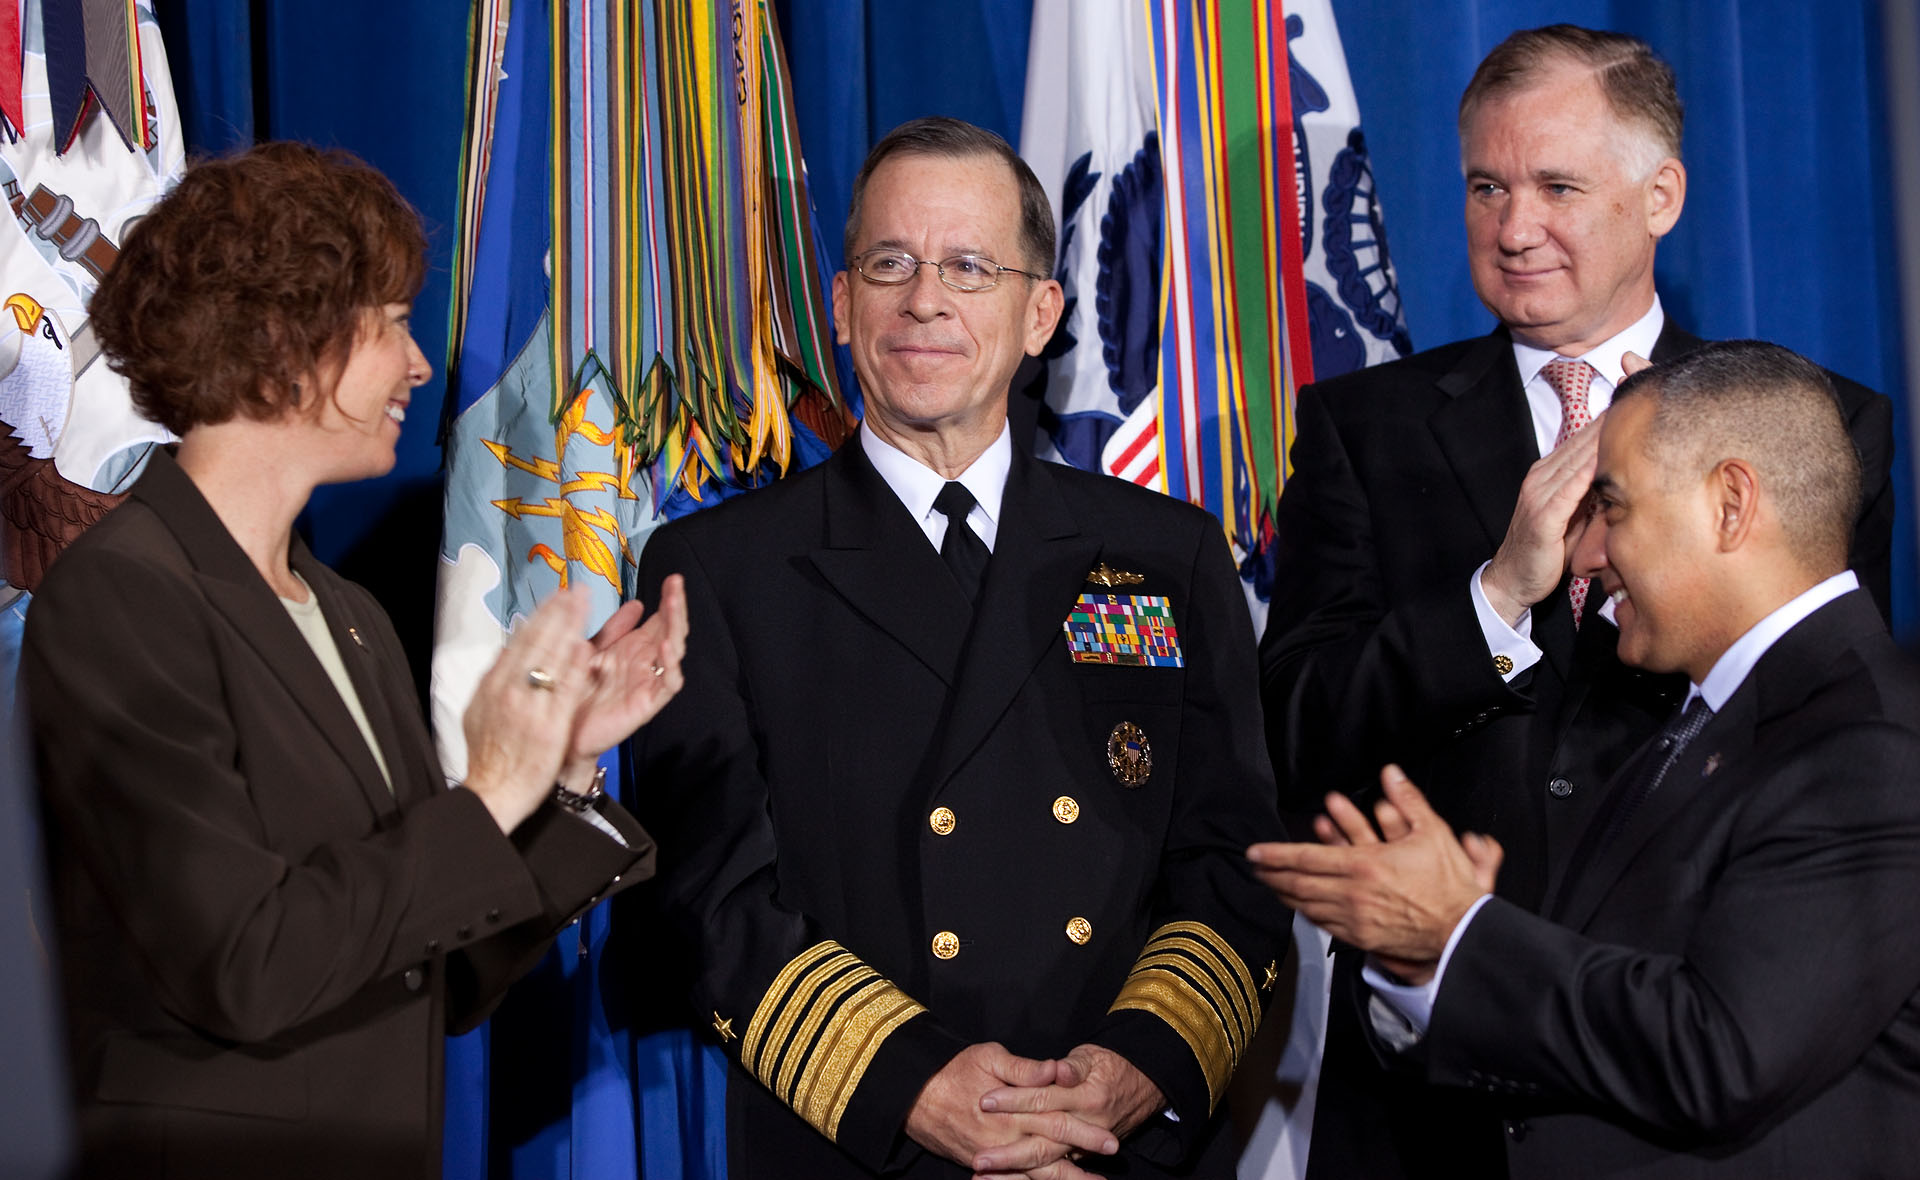 Chairman of the Joint Chiefs of Staff Admiral Mike Mullen at Signing of 